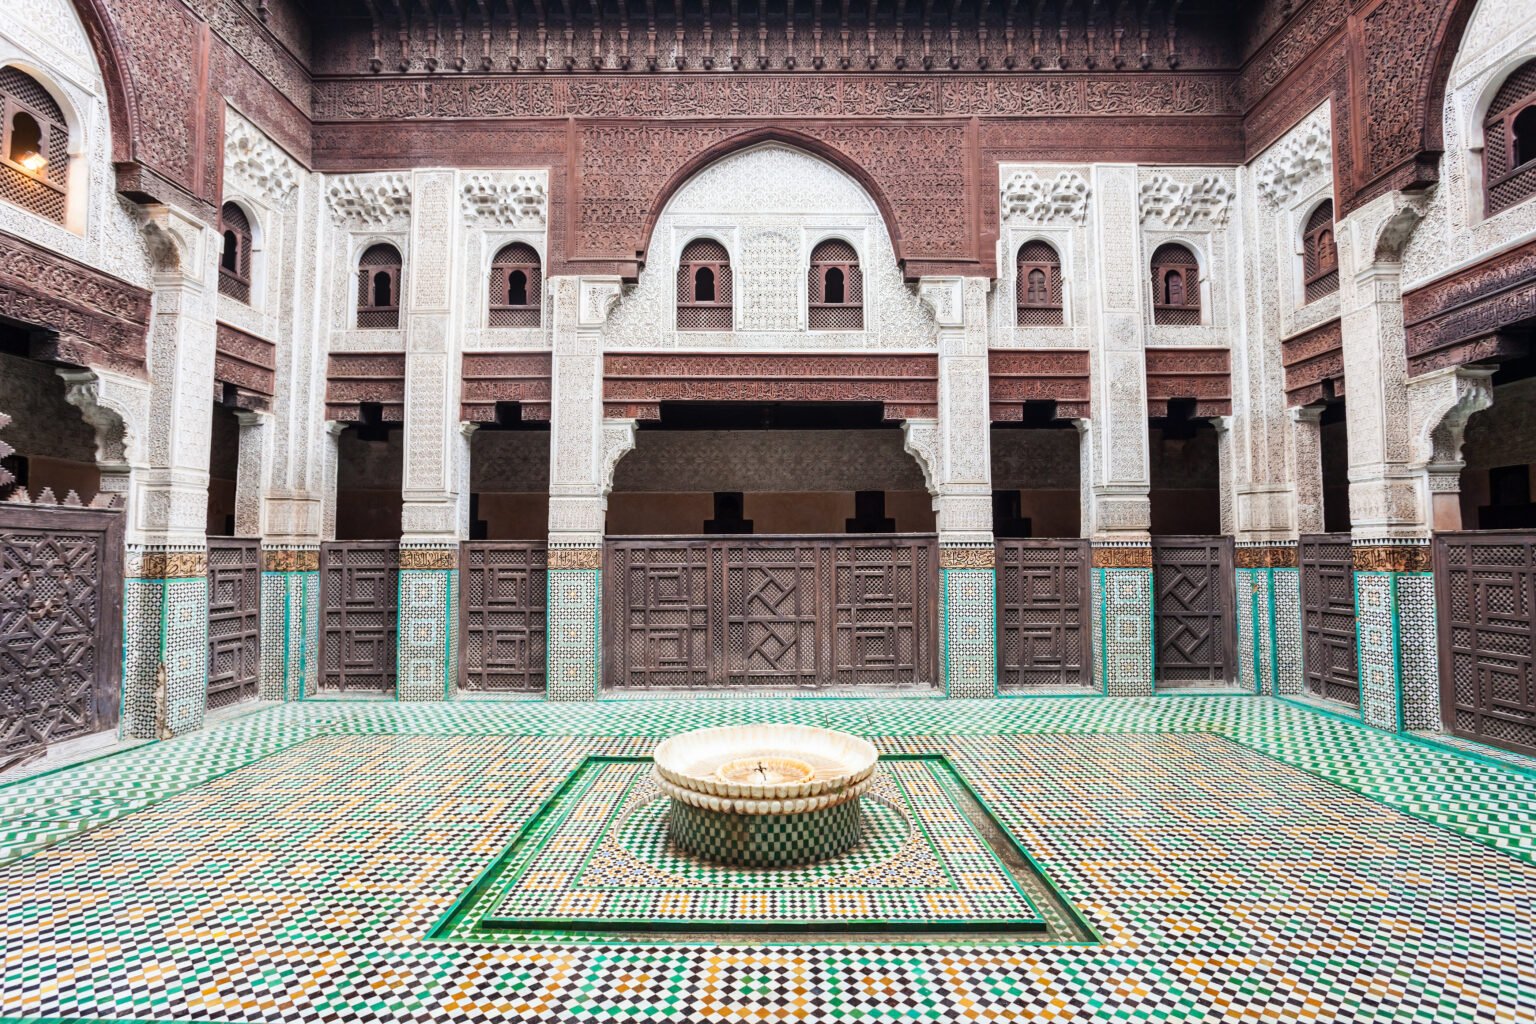 MEKNES, MOROCCO - FEBRUARY 29, 2016: Pattern design element of the Madrasa Bou Inania in Meknes, Morocco. Madrasa Bou Inania is acknowledged as an excellent example of Marinid architecture in Meknes.